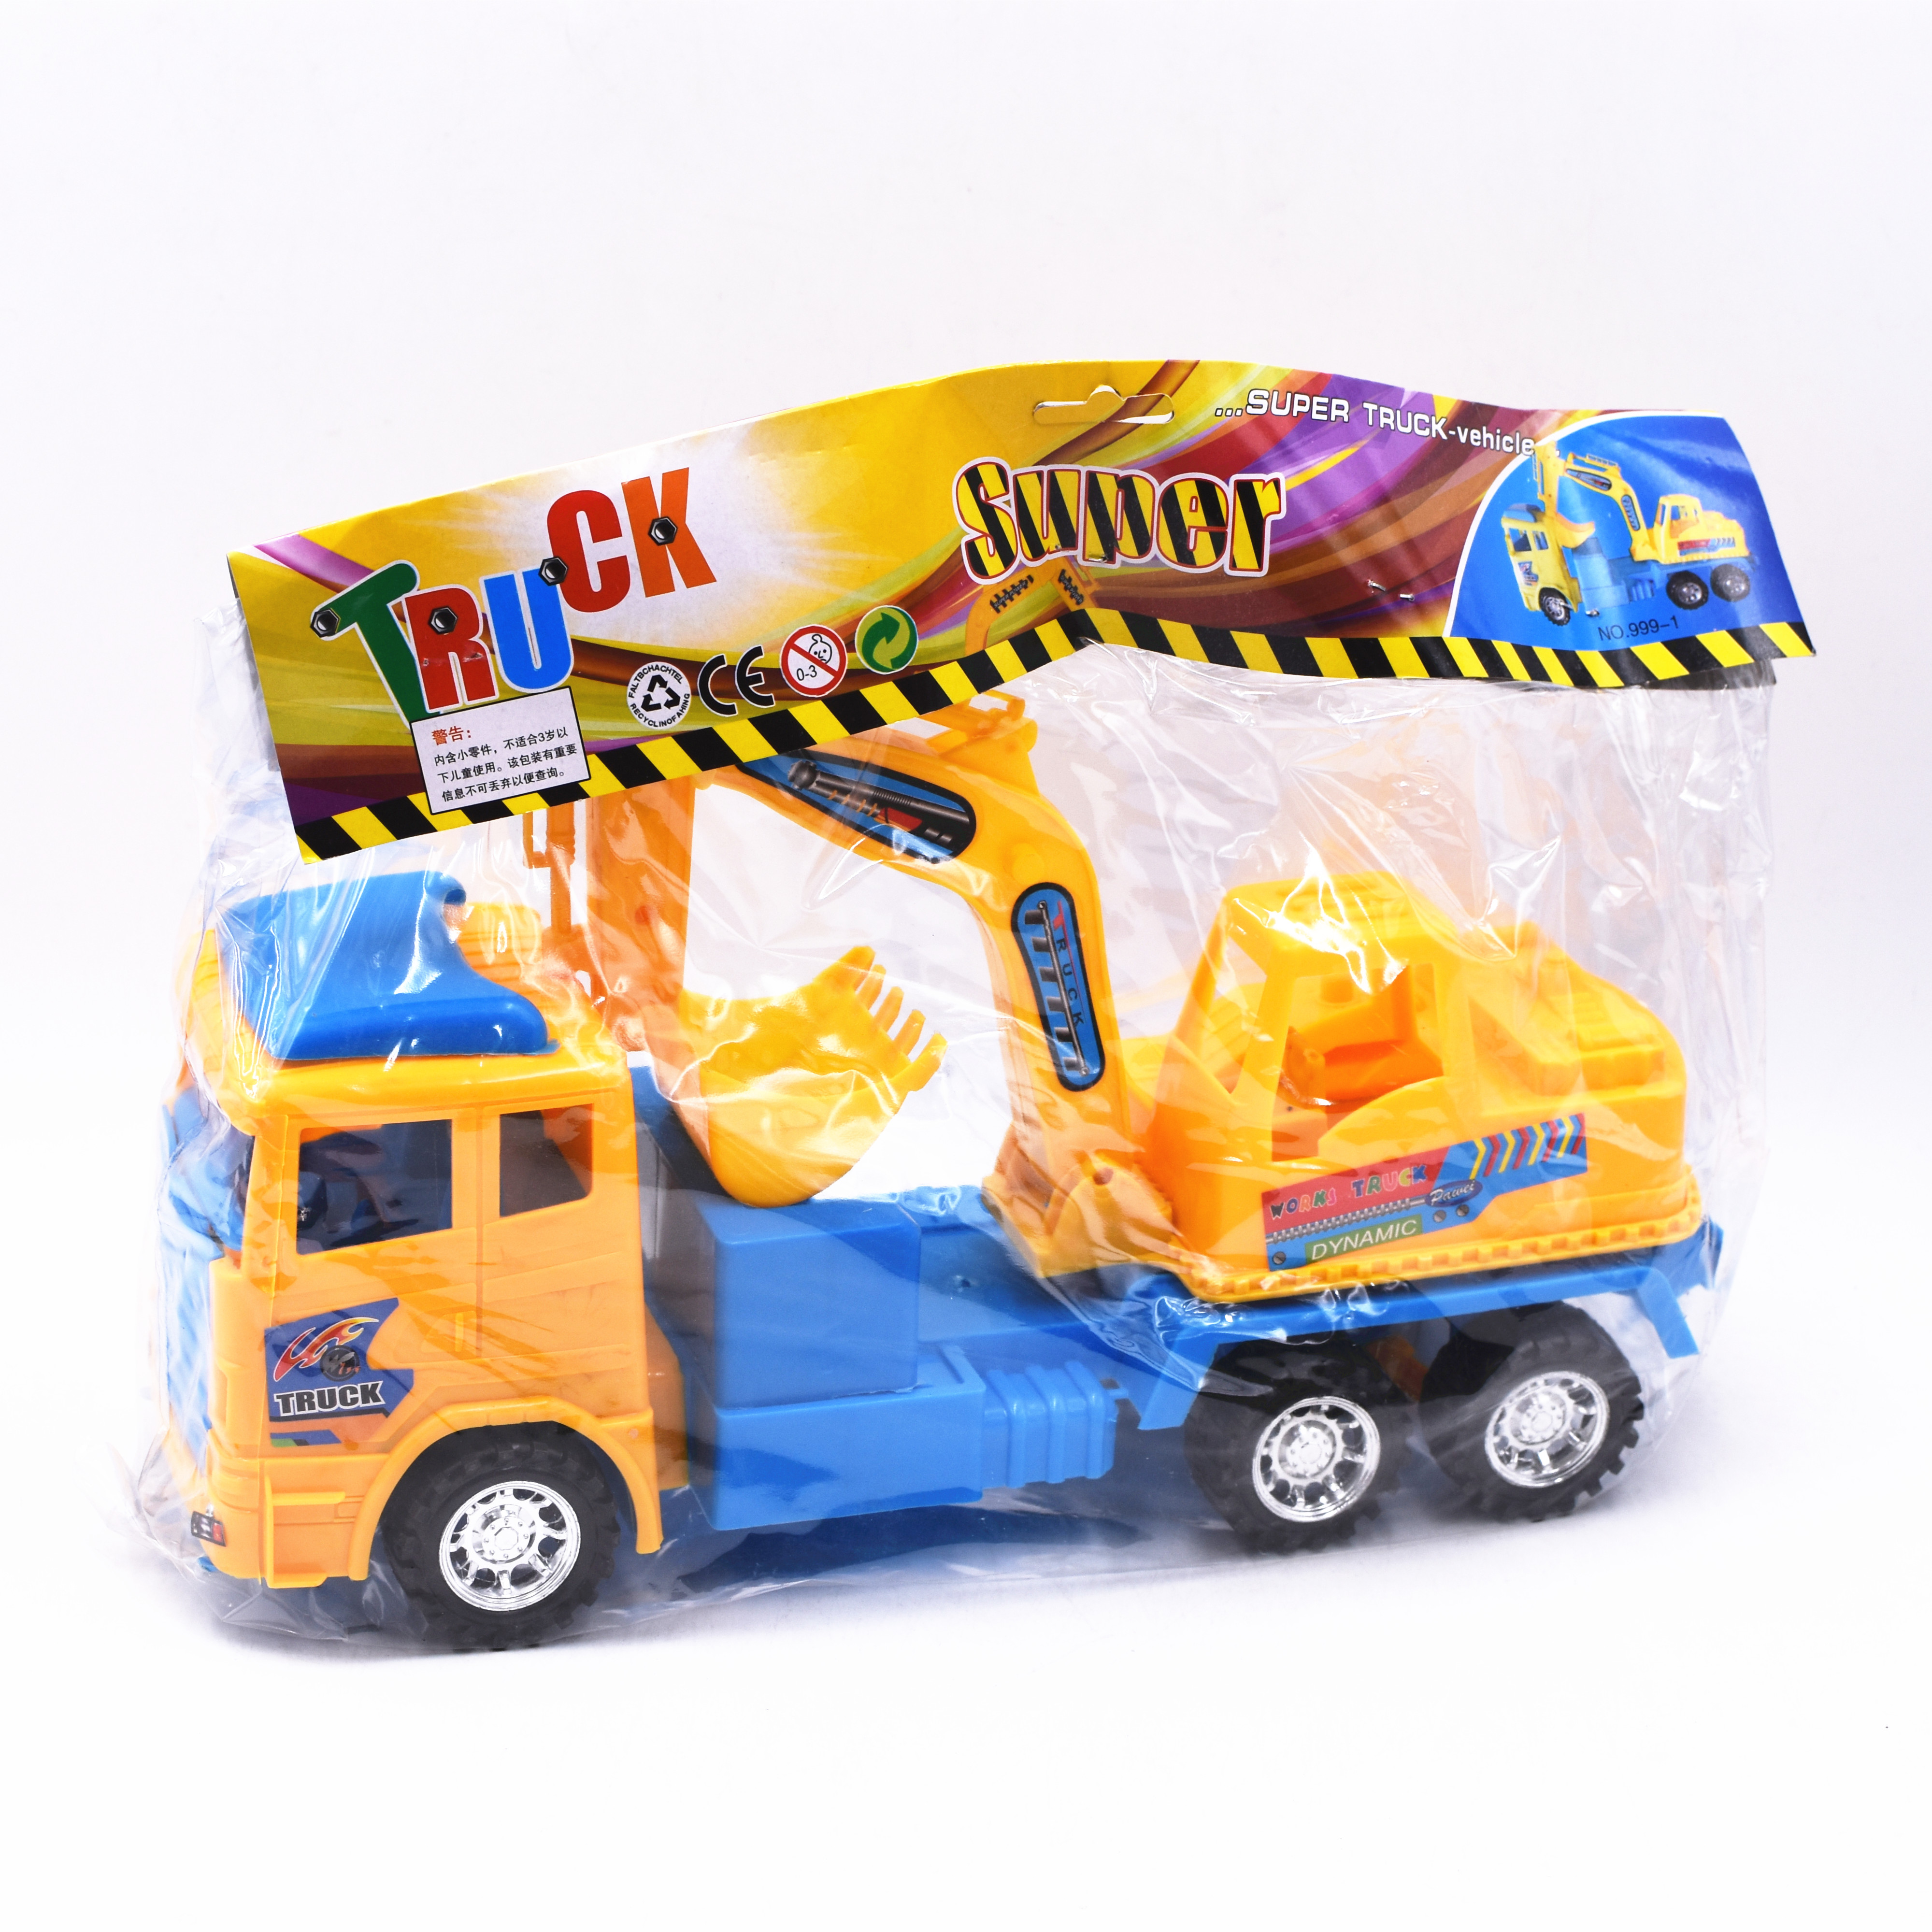 FREE WHEEL TRUCK TOY LY1736